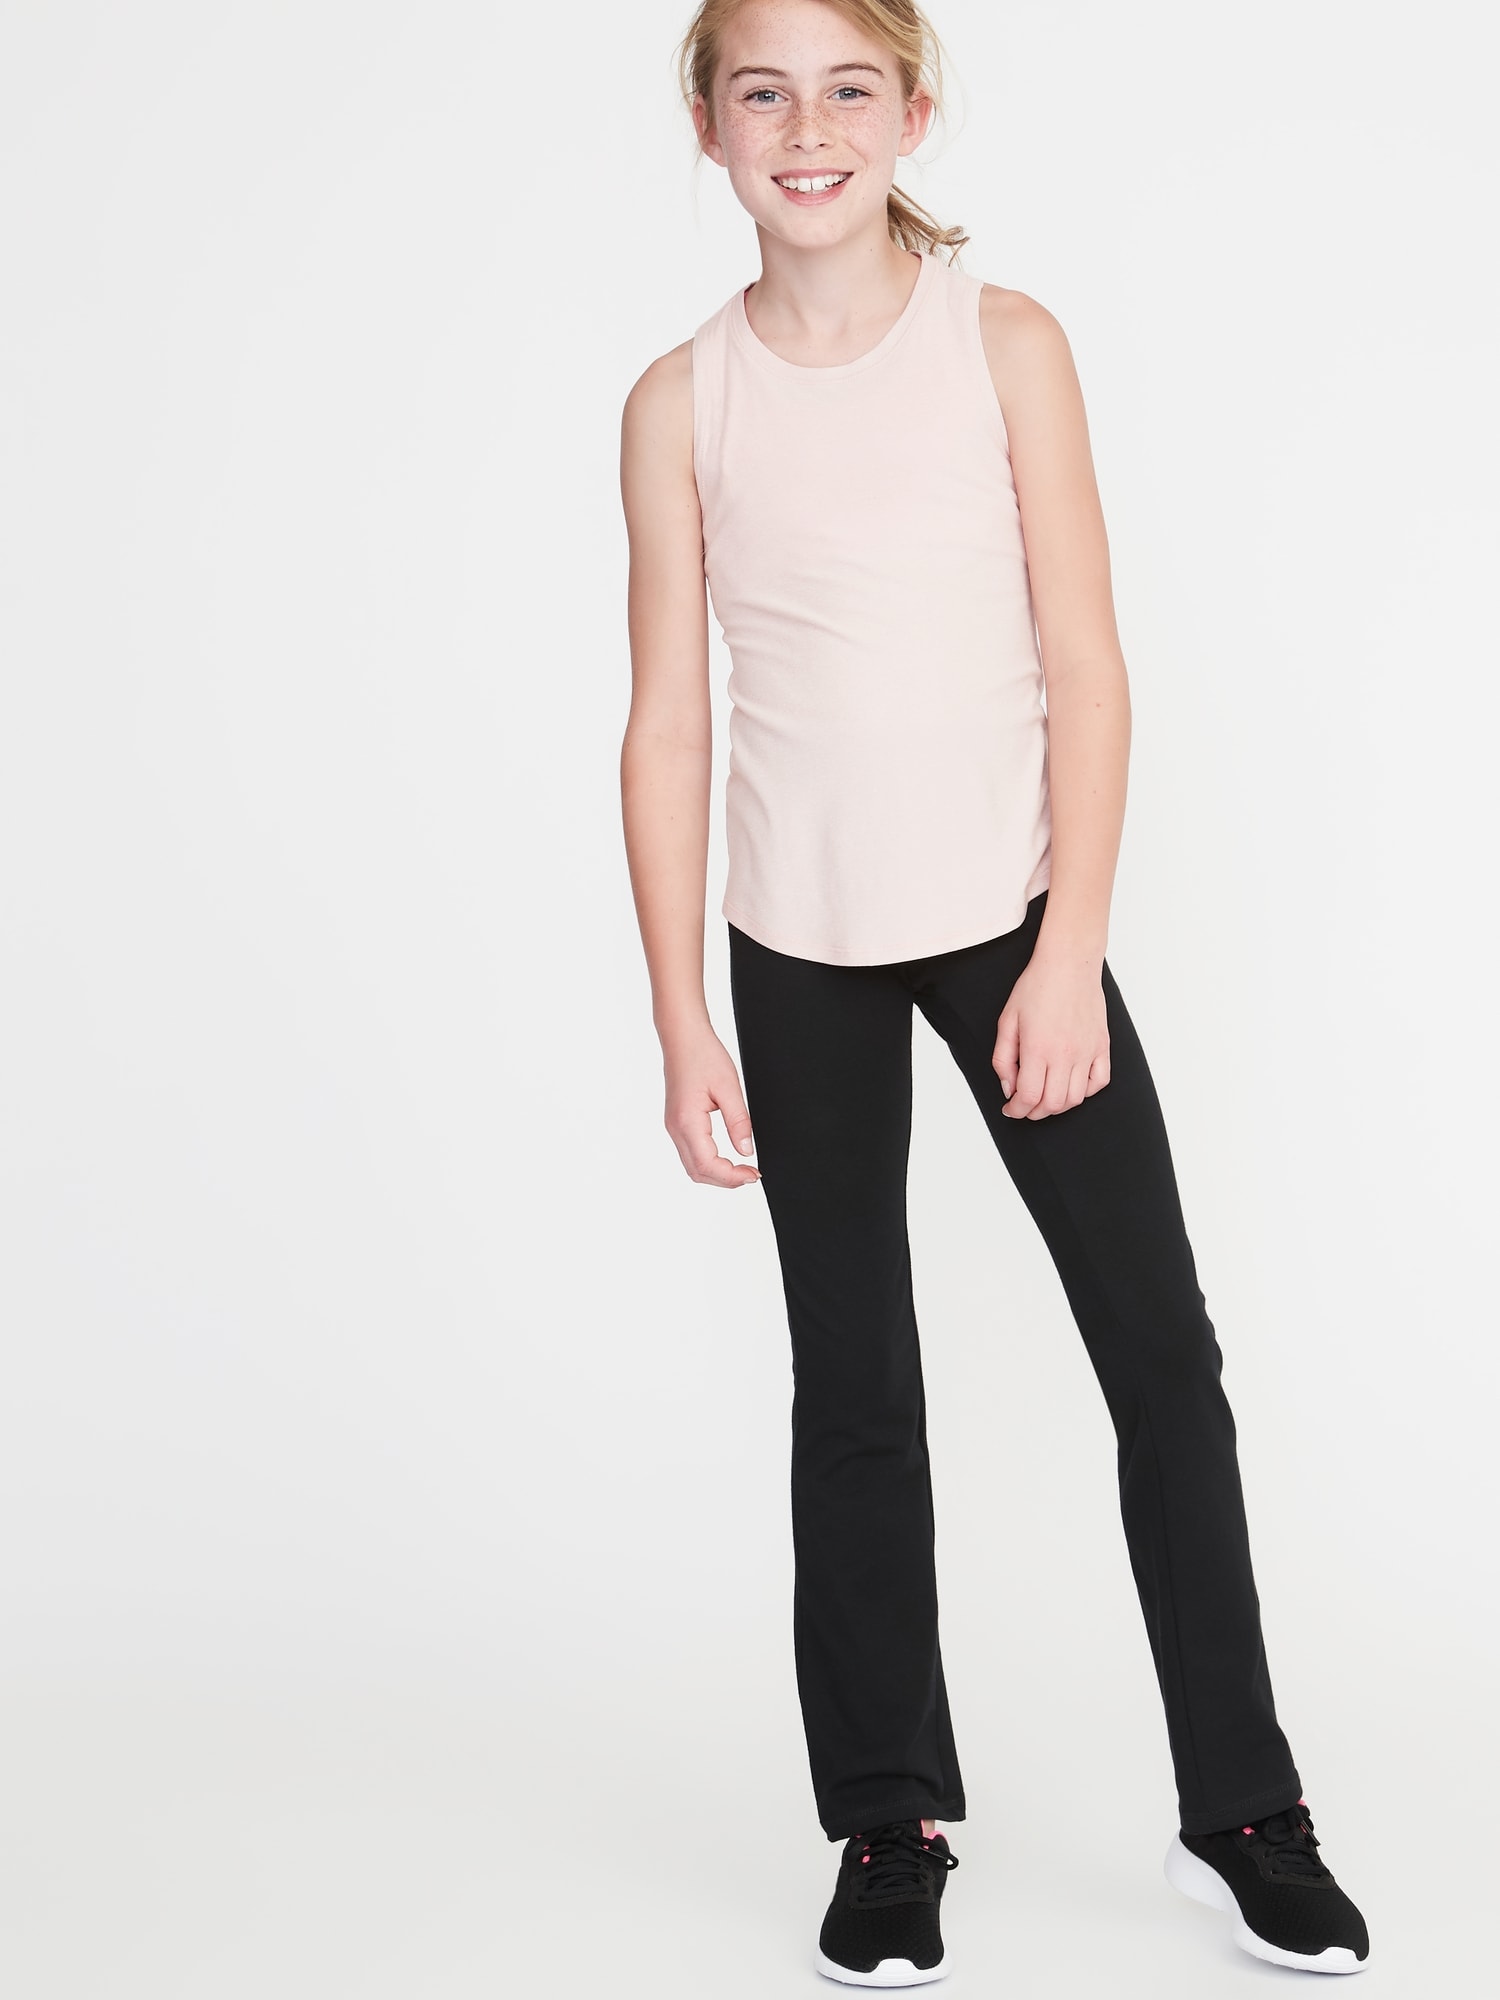 Jersey Yoga Pants for Girls | Old Navy